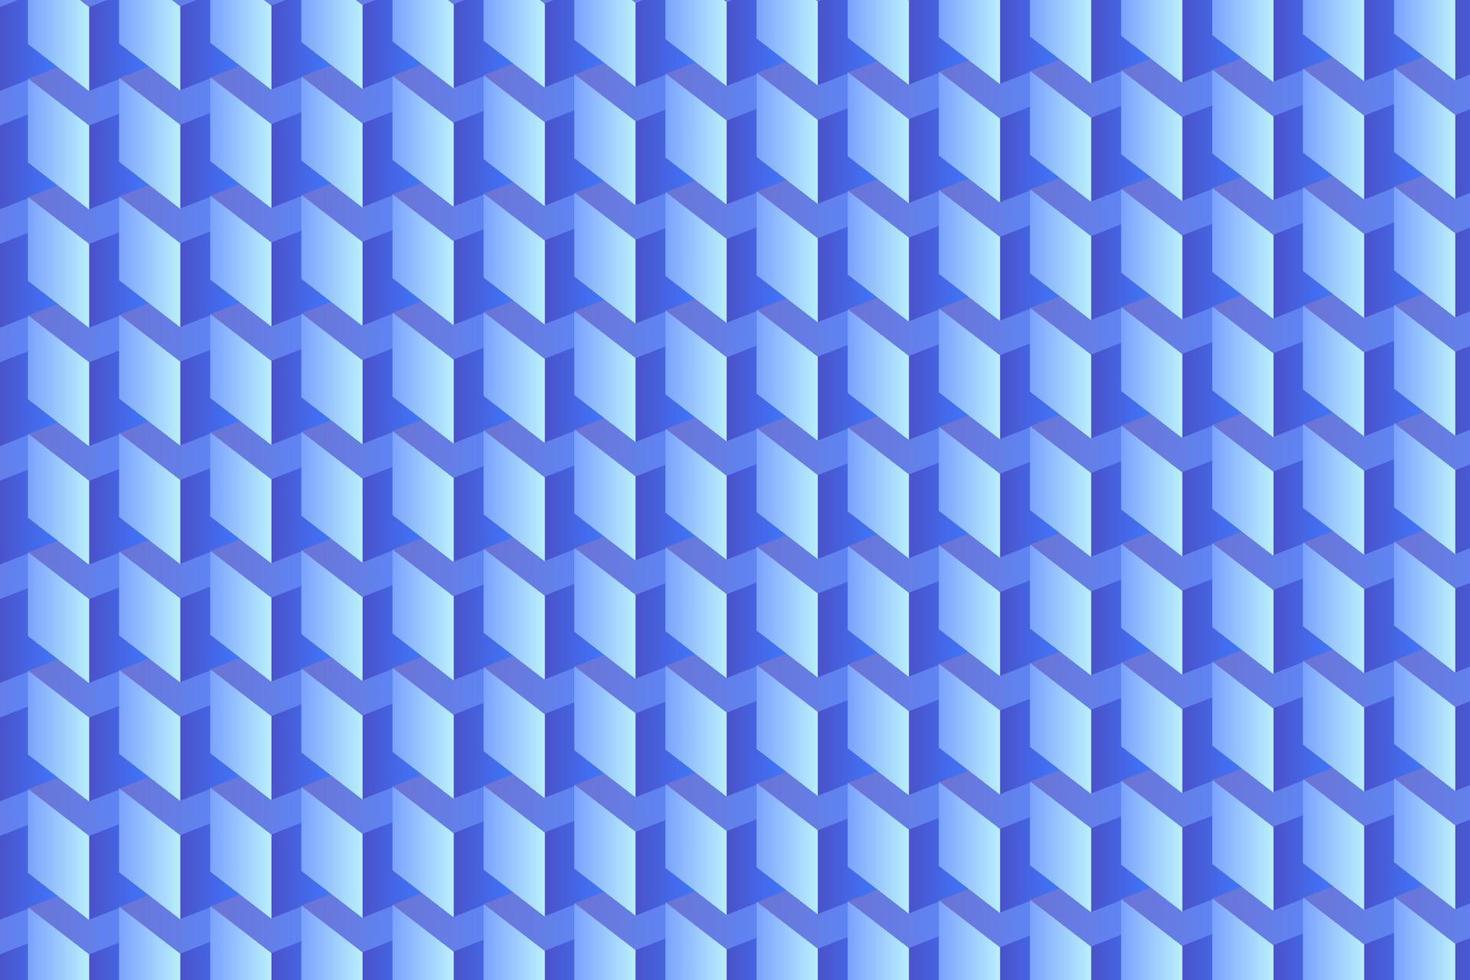 Blue boxes, repeating pattern, bricks, cubes, blocks, 3D rendering, isometric projection wallpaper. vector